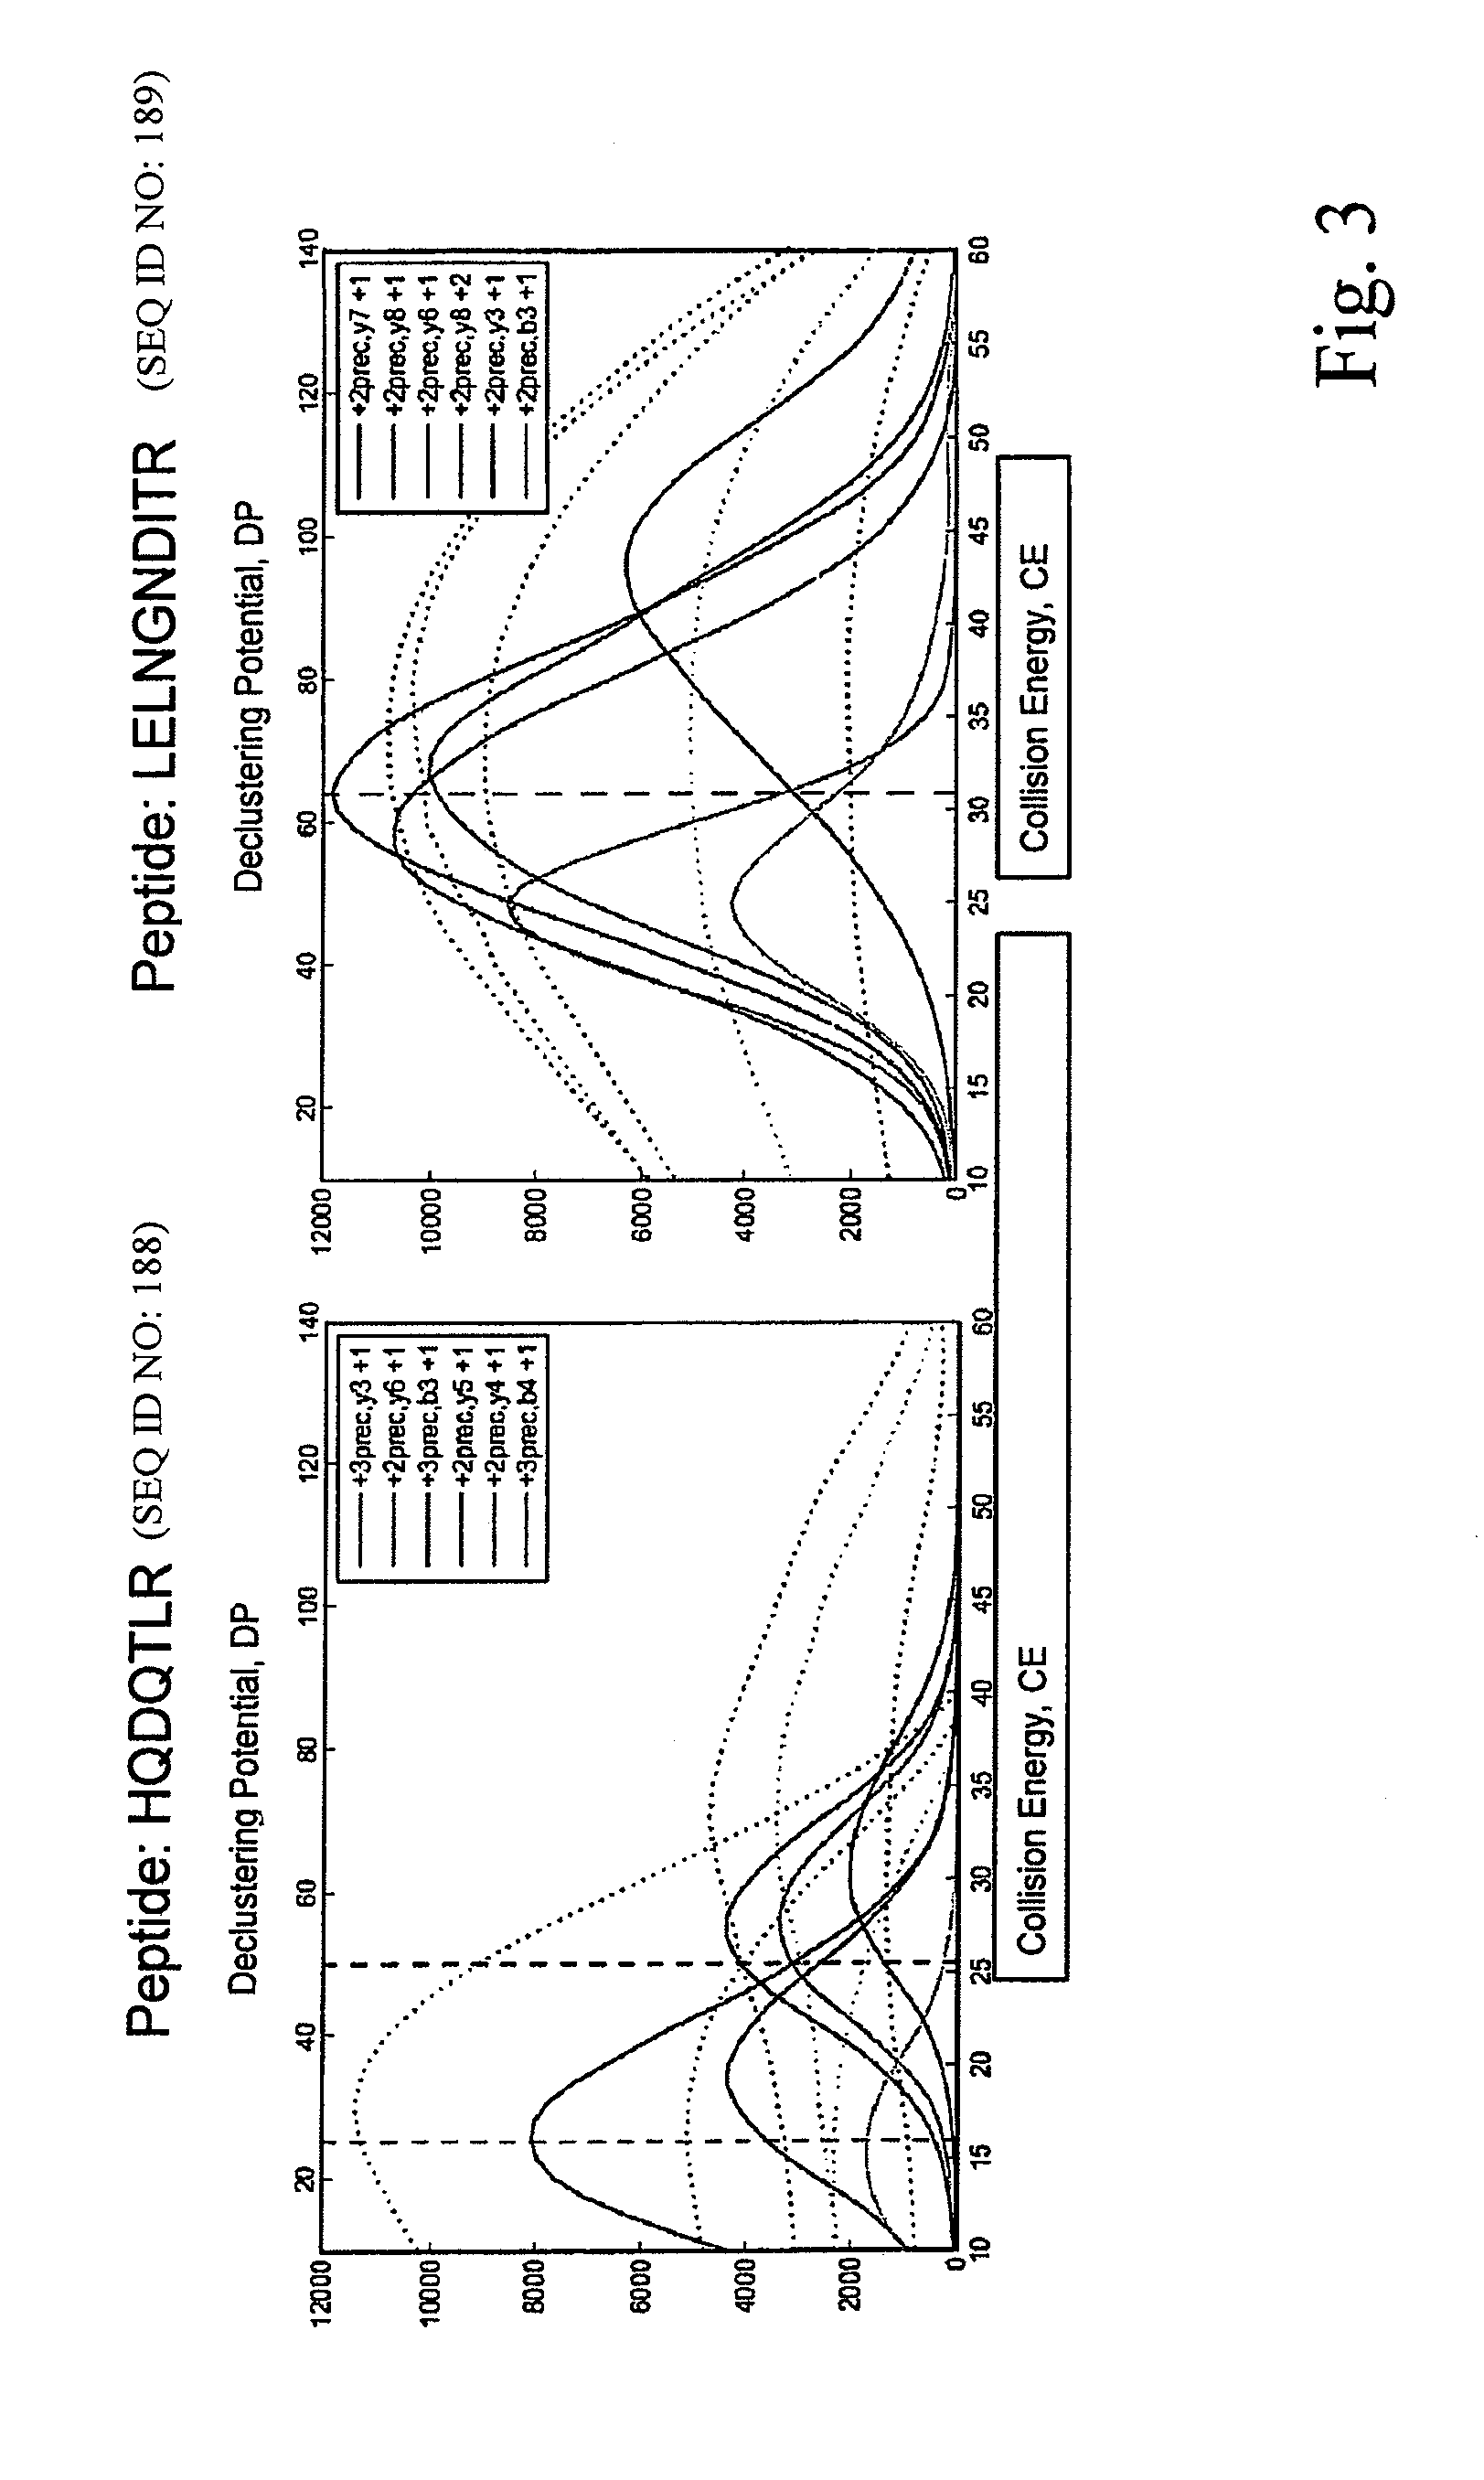 Method for high throughput peptide/protein assay generation and assays generated therewith